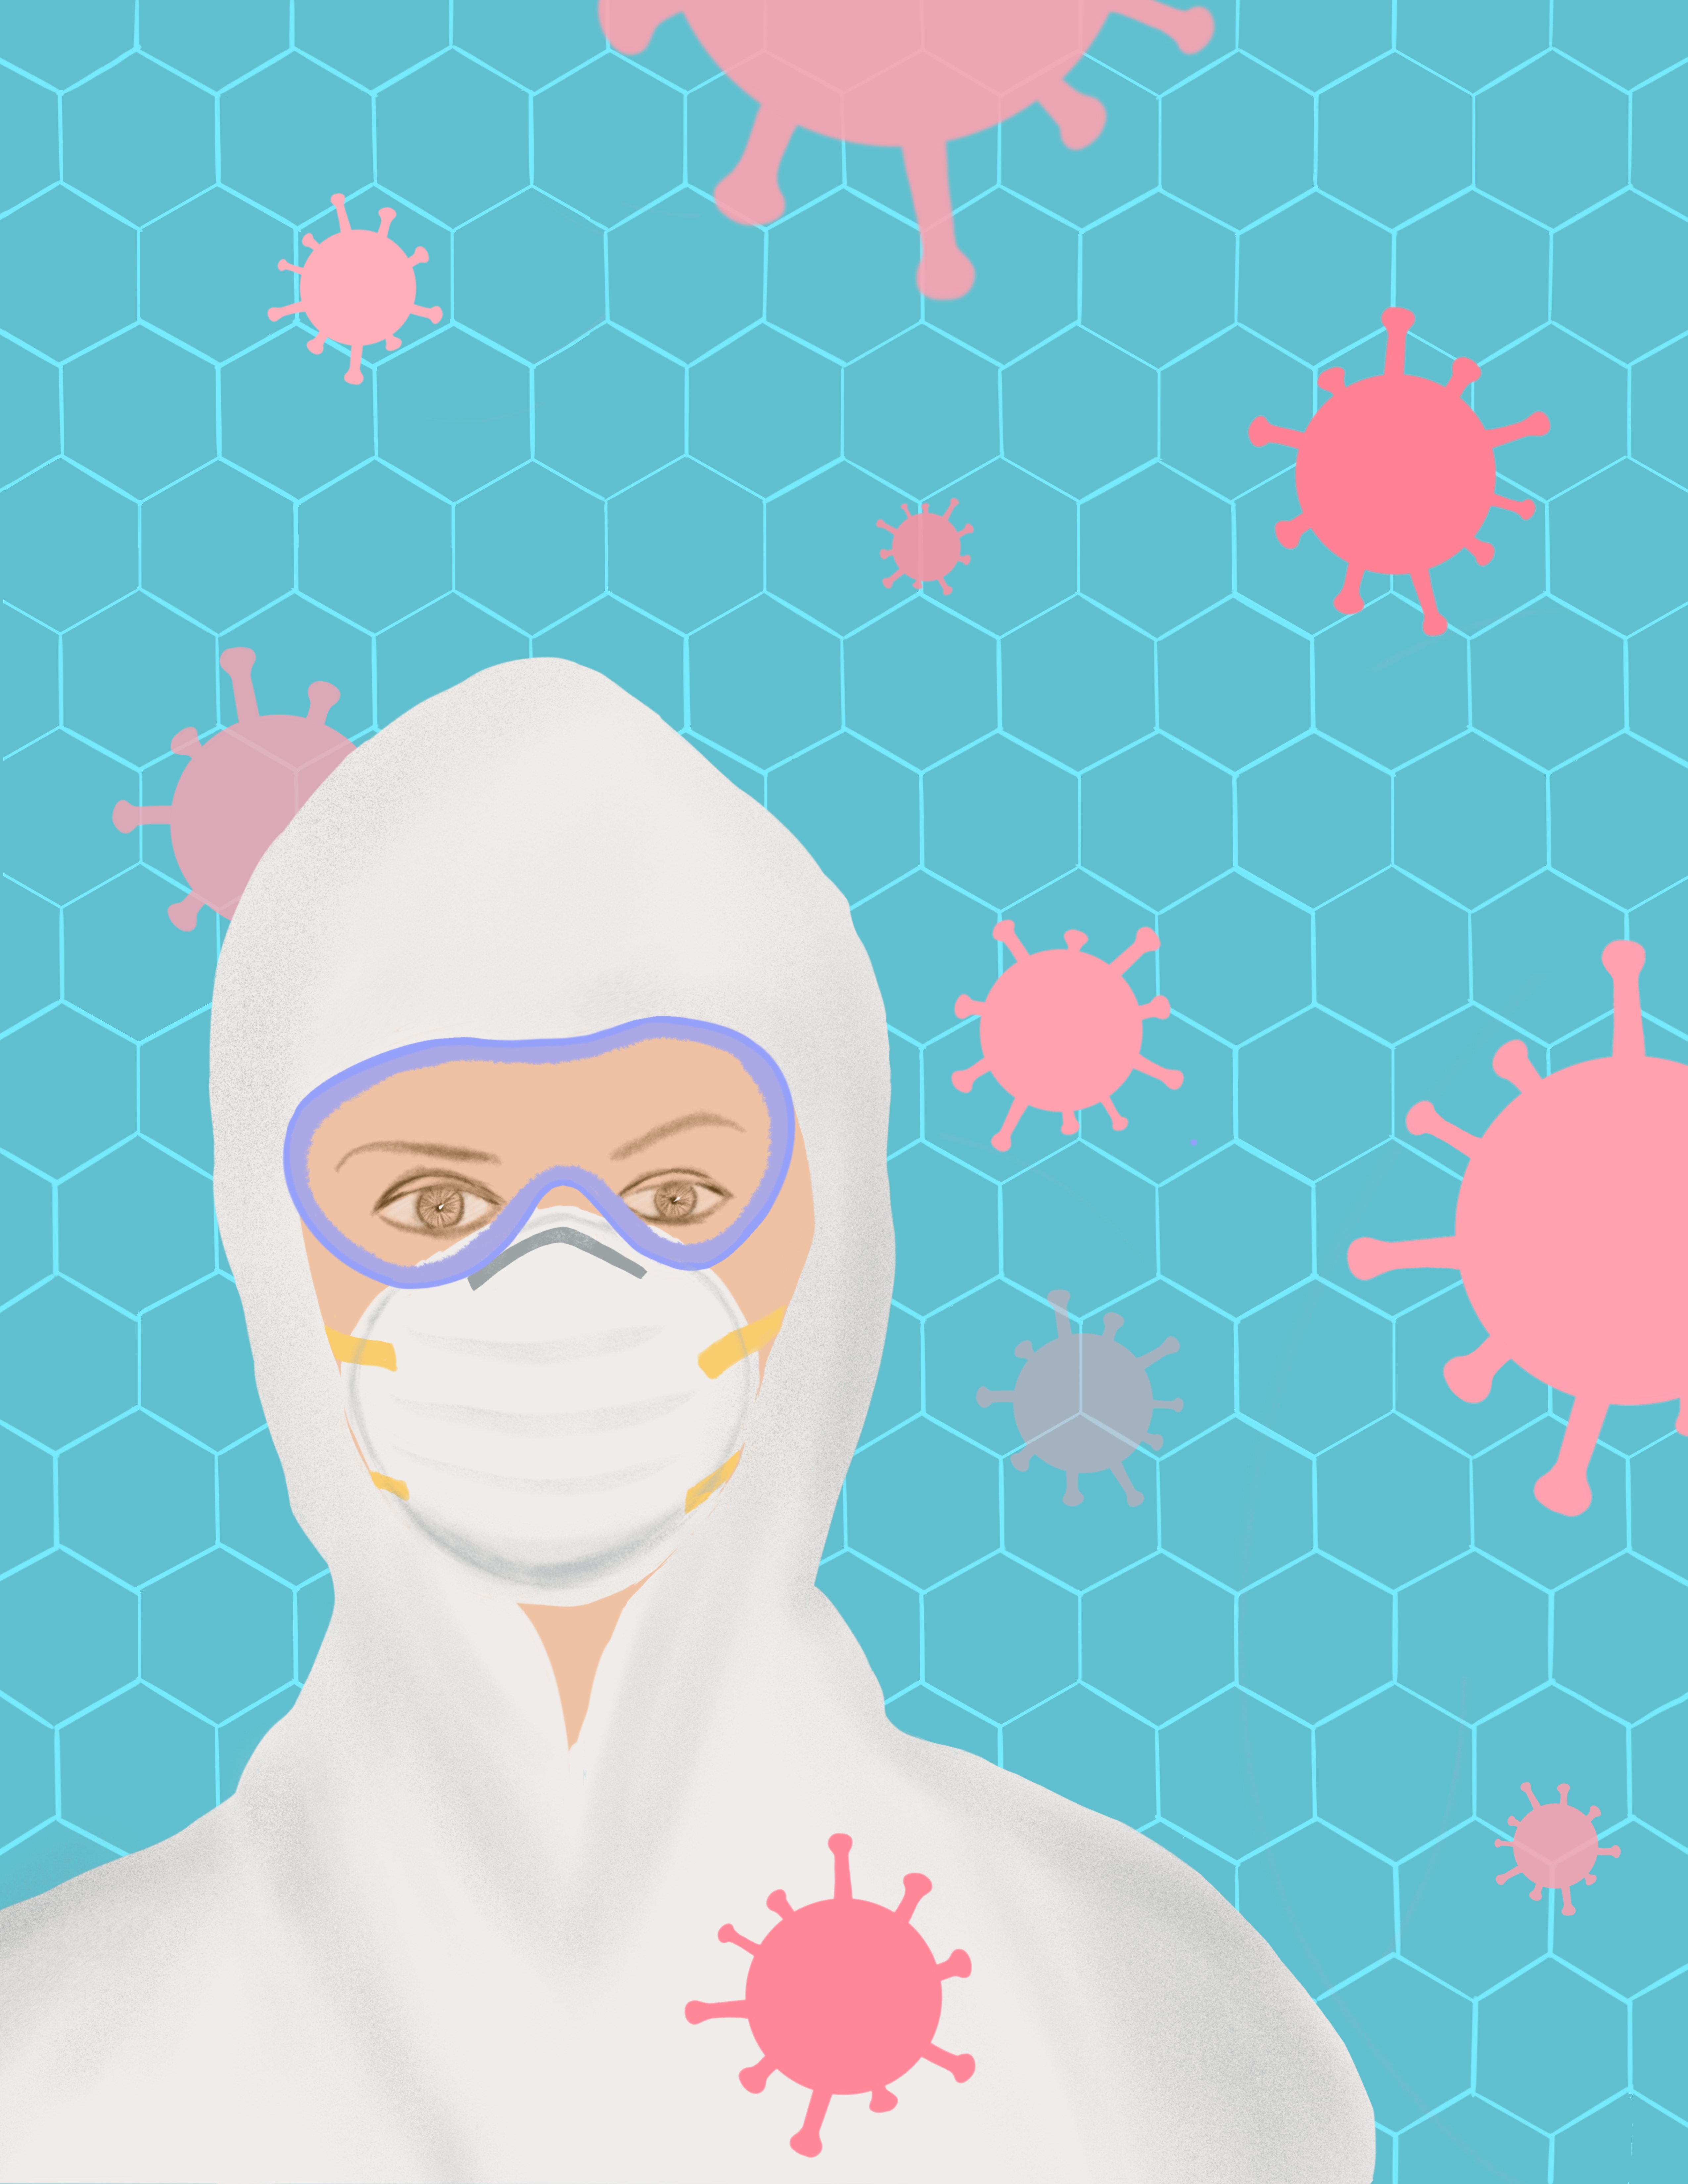 Illustration of health care worker, wearing protective equipment, with COVID-19 particles floating around